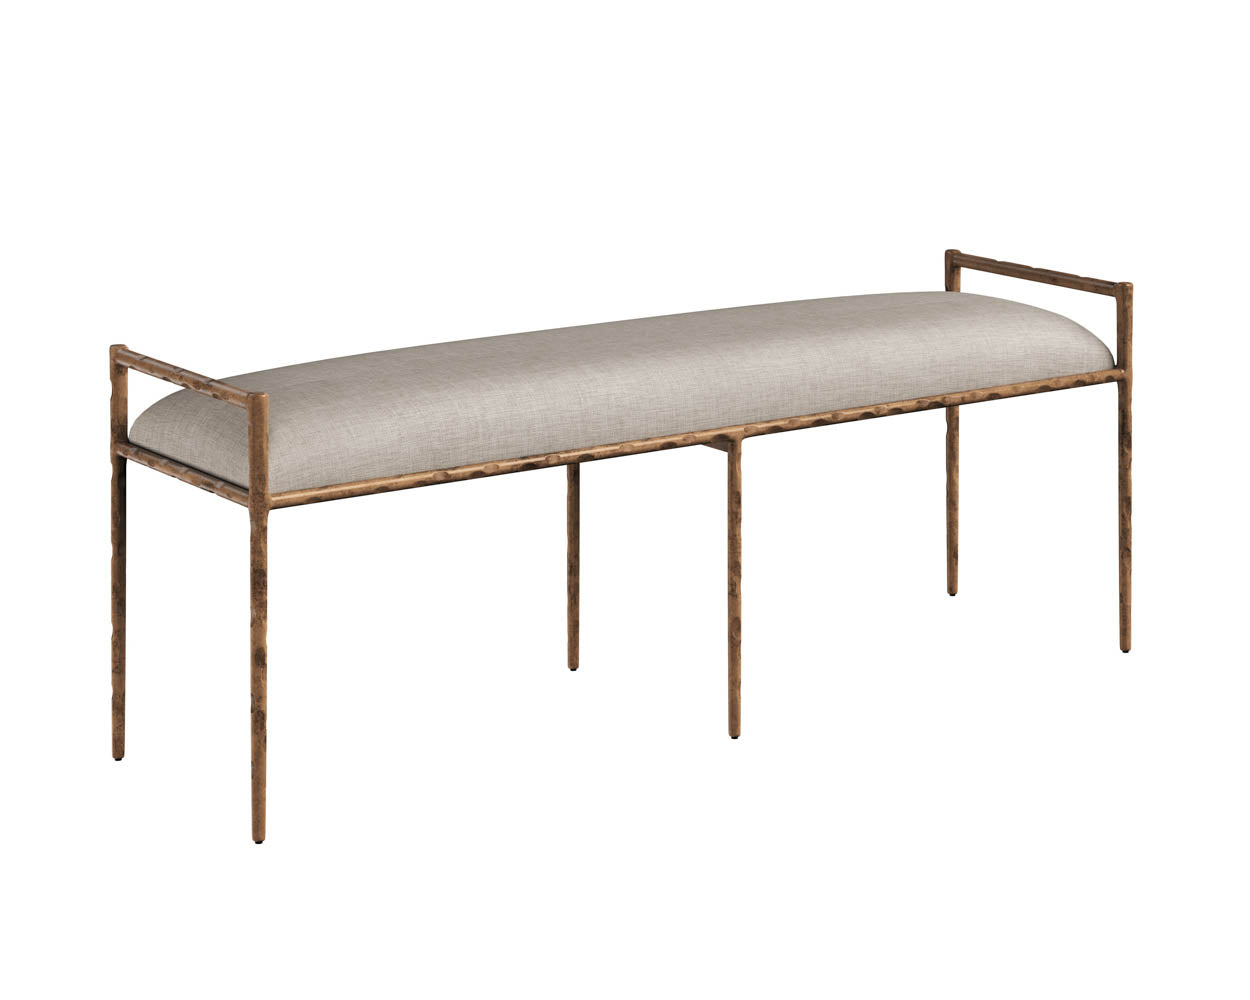 Picture of Esai Bench - Zenith Taupe Grey